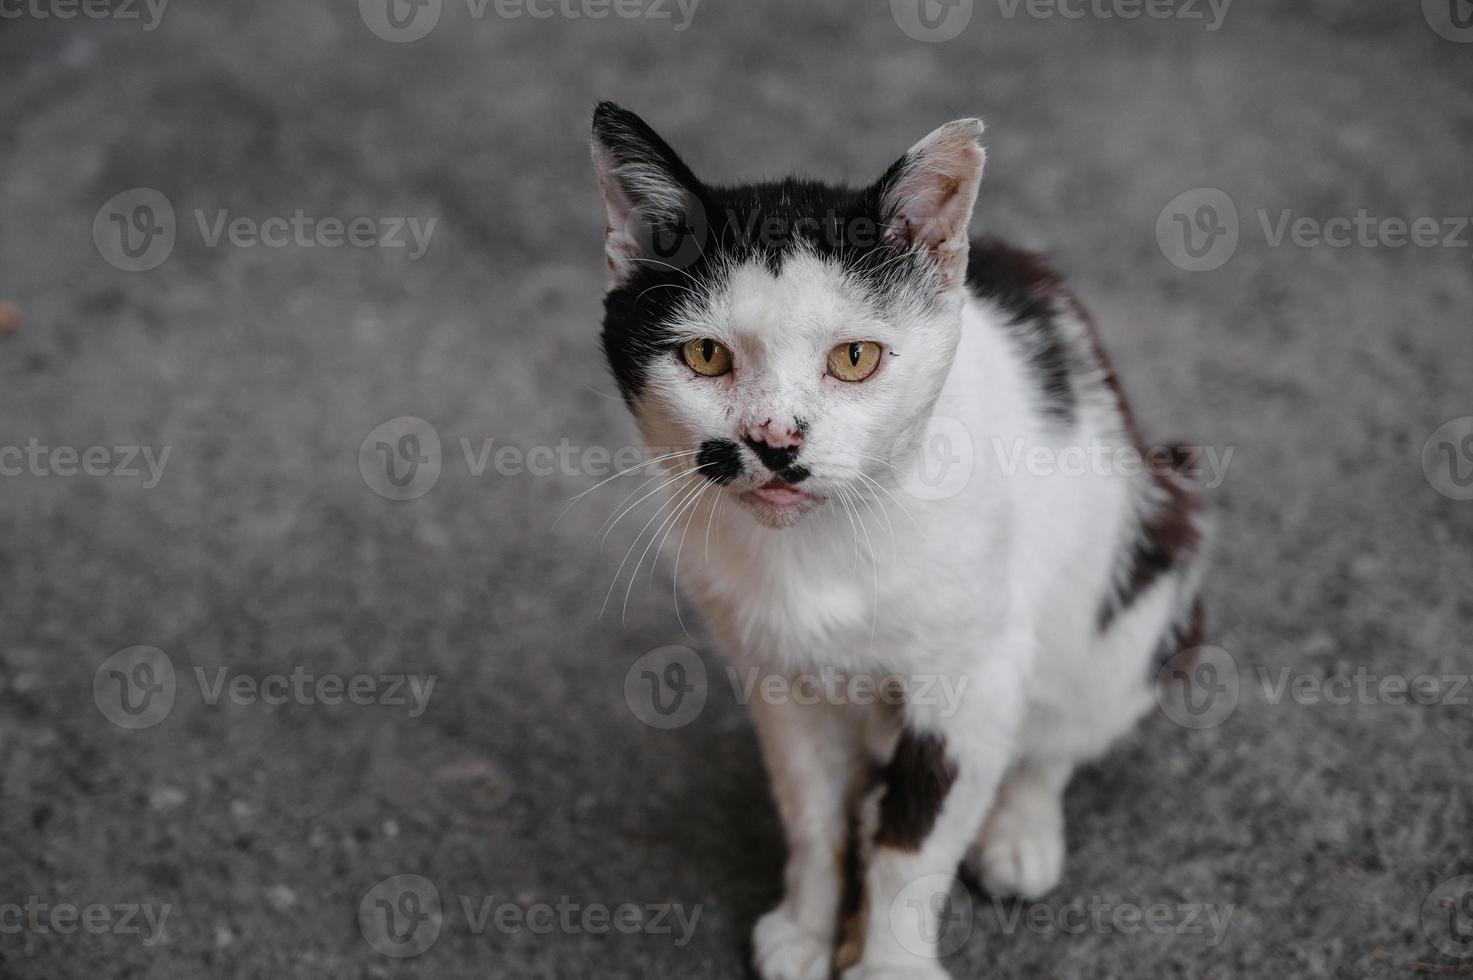 A black and white street cat sitting on a path on the ground. Gurzuf cats photo